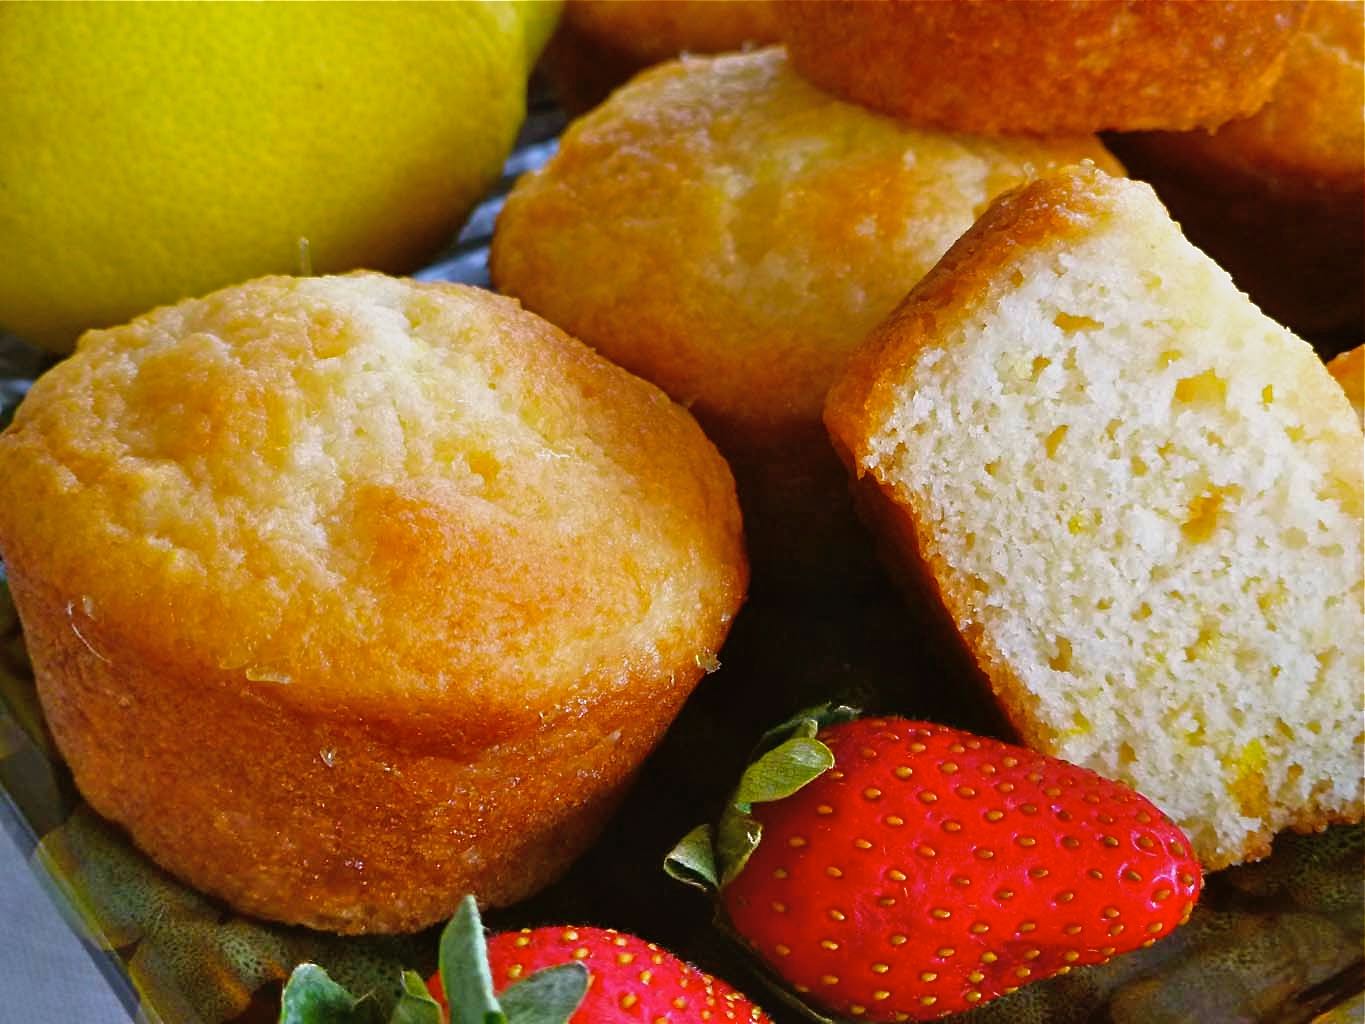 <p>A basic muffin recipe is transformed into moist, lovely lemon treats with the addition of lemon yogurt and lemon juice. "These are delicious!" says home cook Sarah Waltrip. "I added one lemon yogurt and one honey Greek yogurt. I doubled the recipe and I got 22 muffins!"</p>
                          